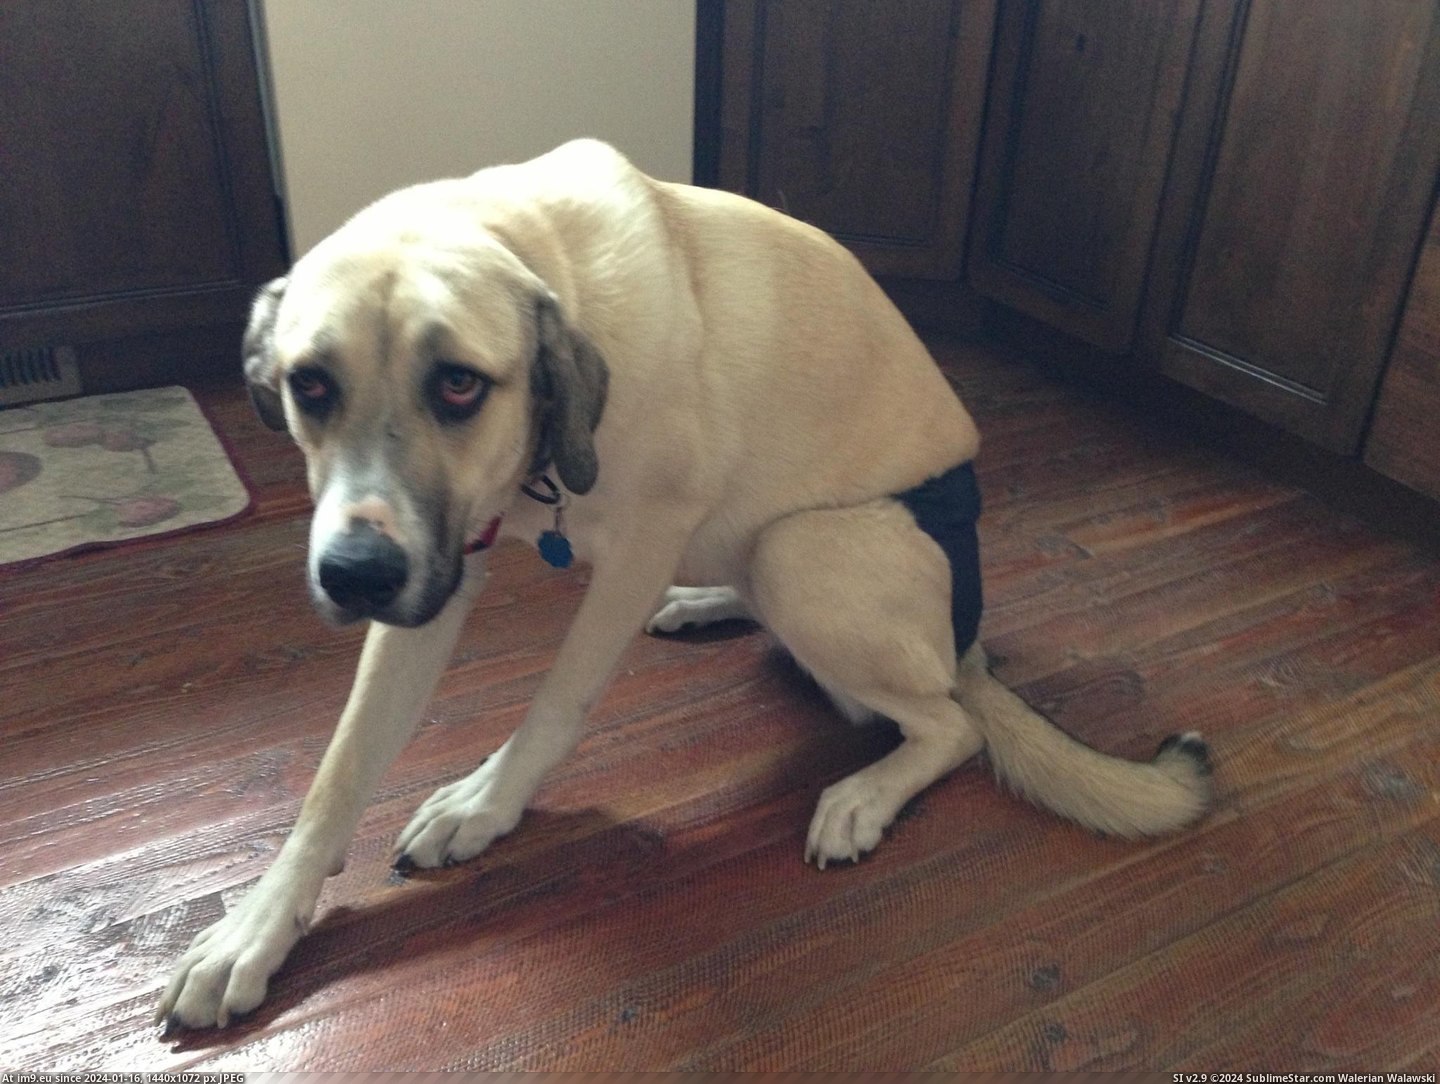 #Friend #Dog #Animal #Diaper #Saddest #Wear #Any #Poor [Aww] My friend's dog has to wear a diaper and it's the saddest I've seen any animal.. Pic. (Image of album My r/AWW favs))